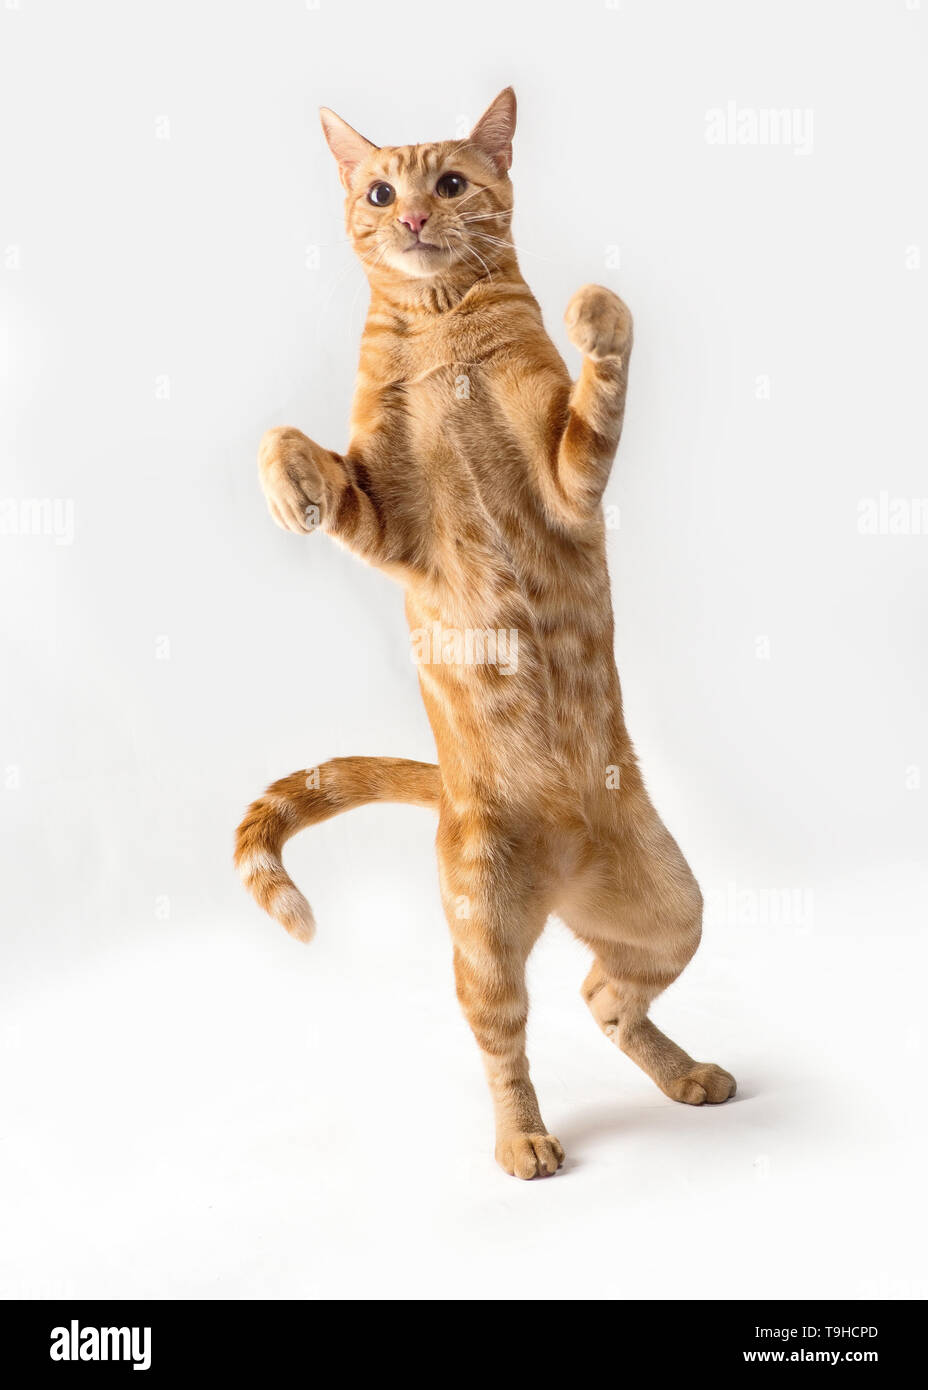 ginger red cat posing on white background Stock Photo